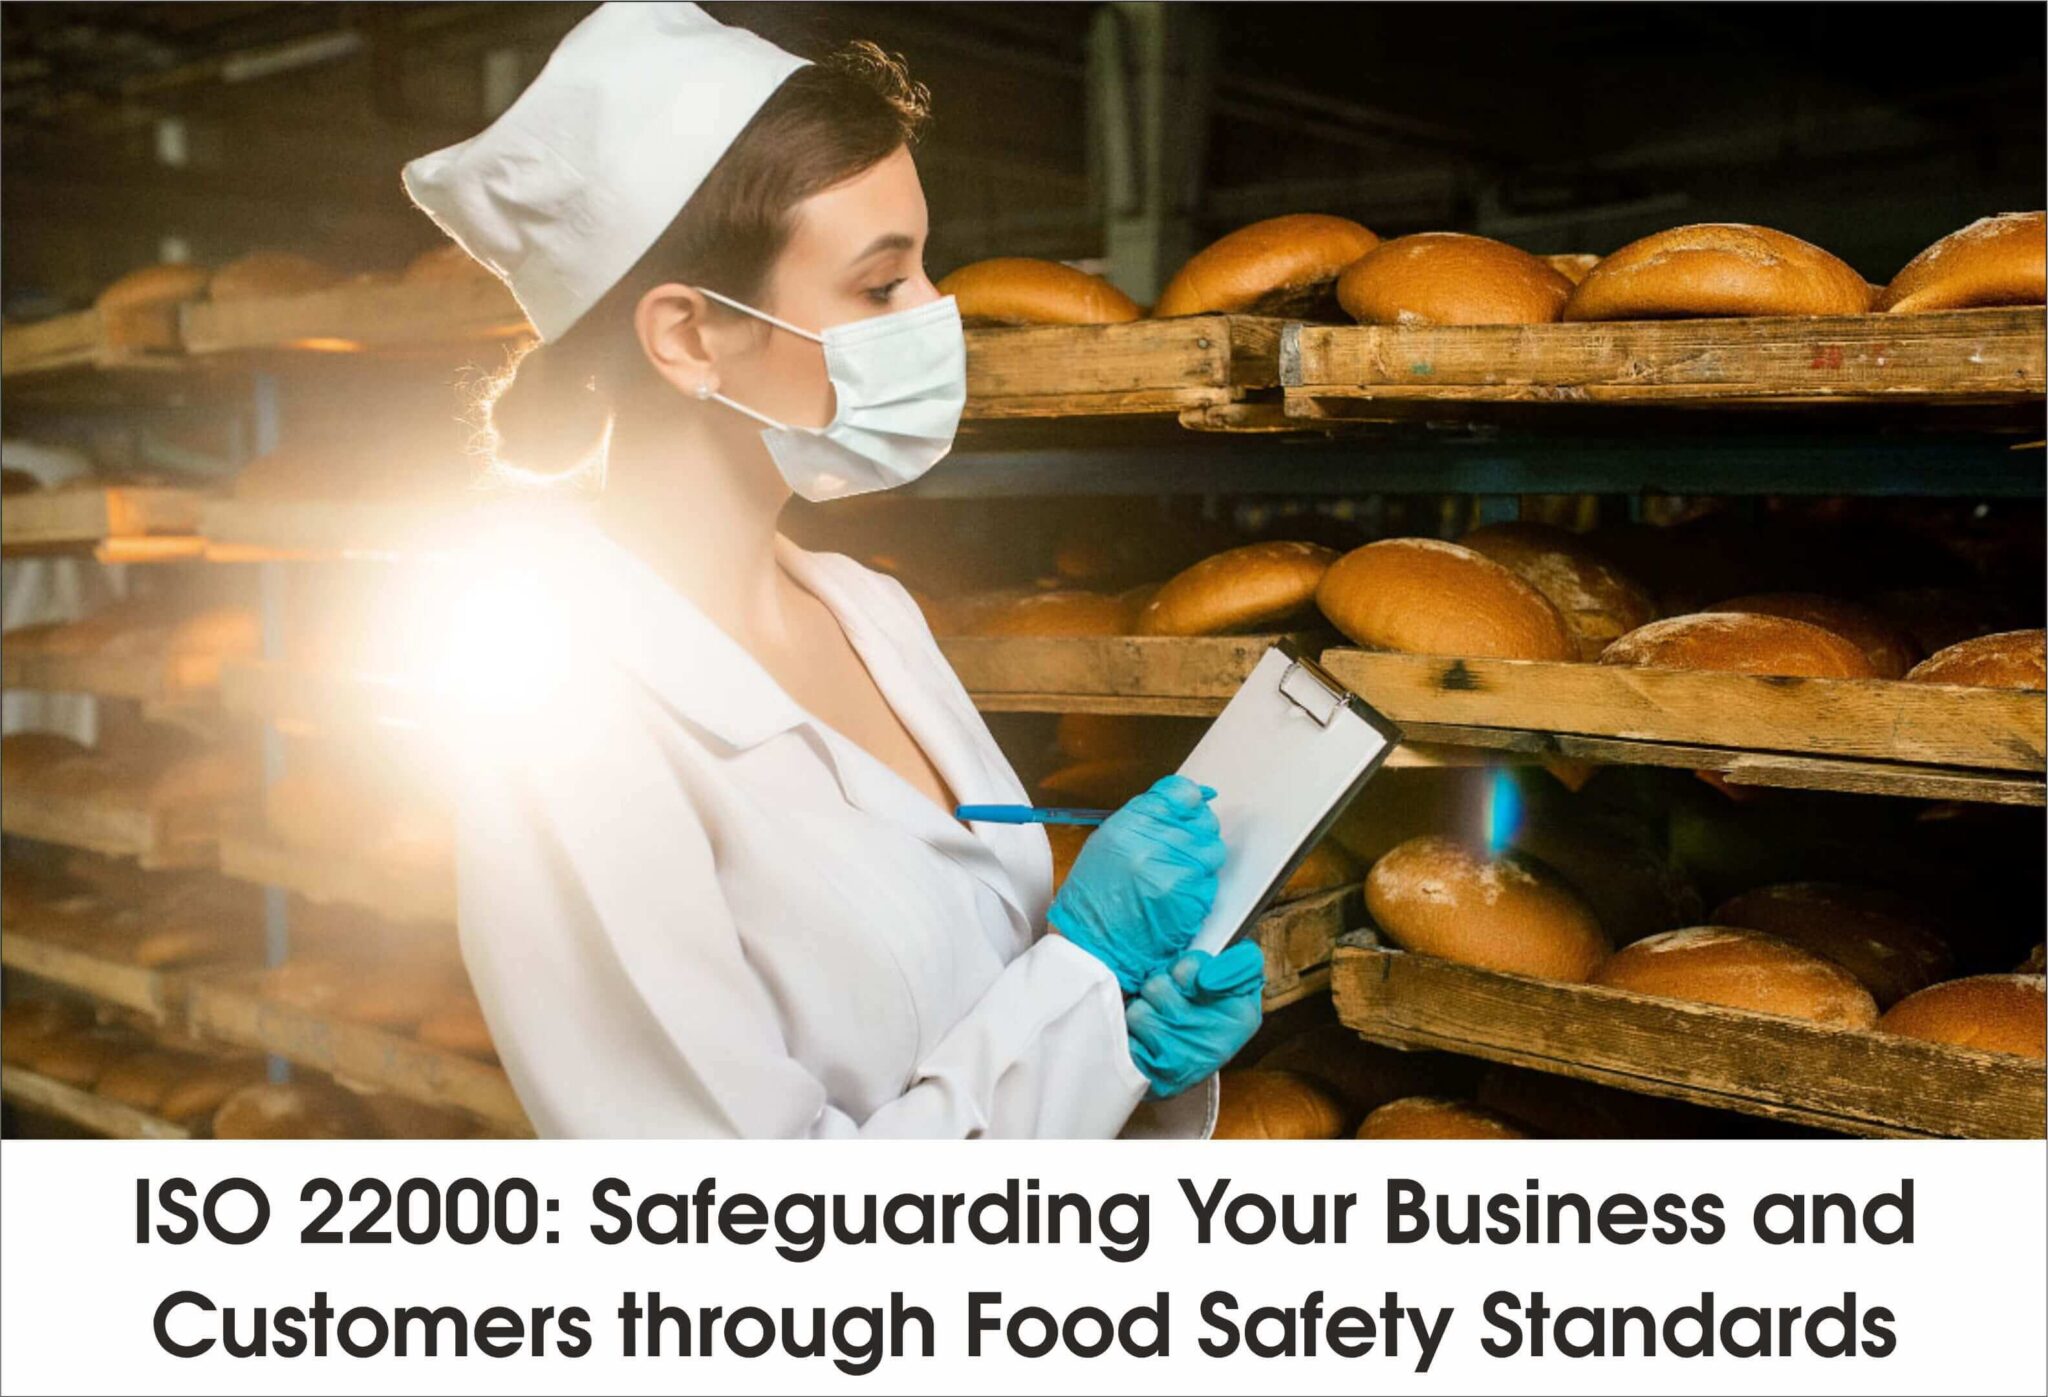 ISO 22000: Safeguarding Your Business and Customers through Food Safety Standards